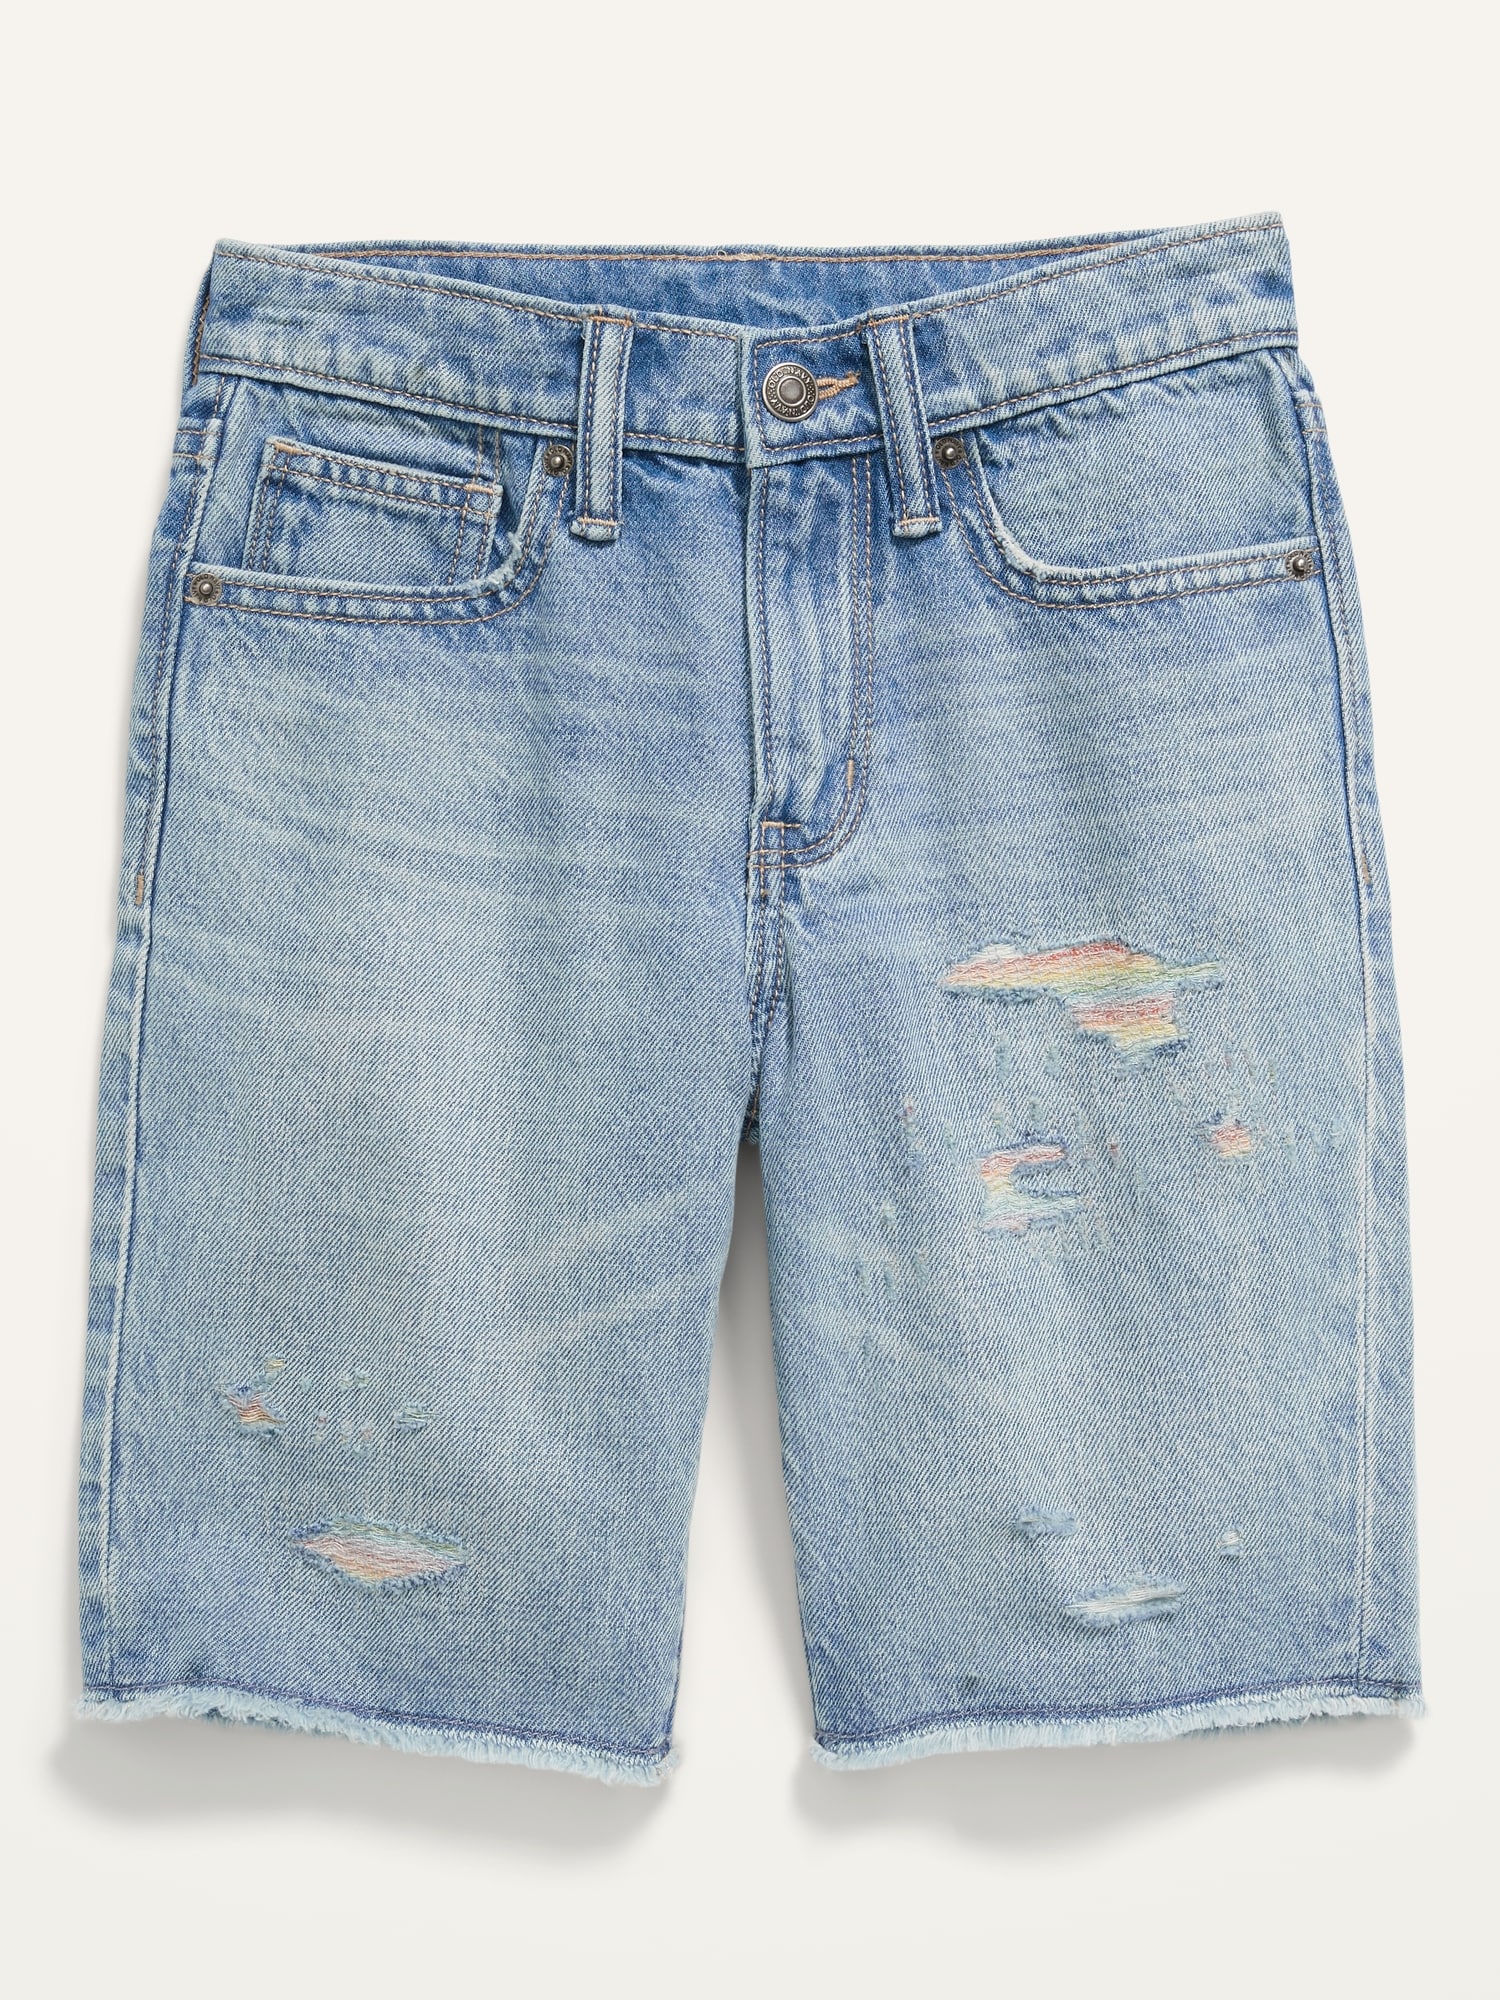 Original Loose Non-Stretch Jean Shorts for Boys | Old Navy